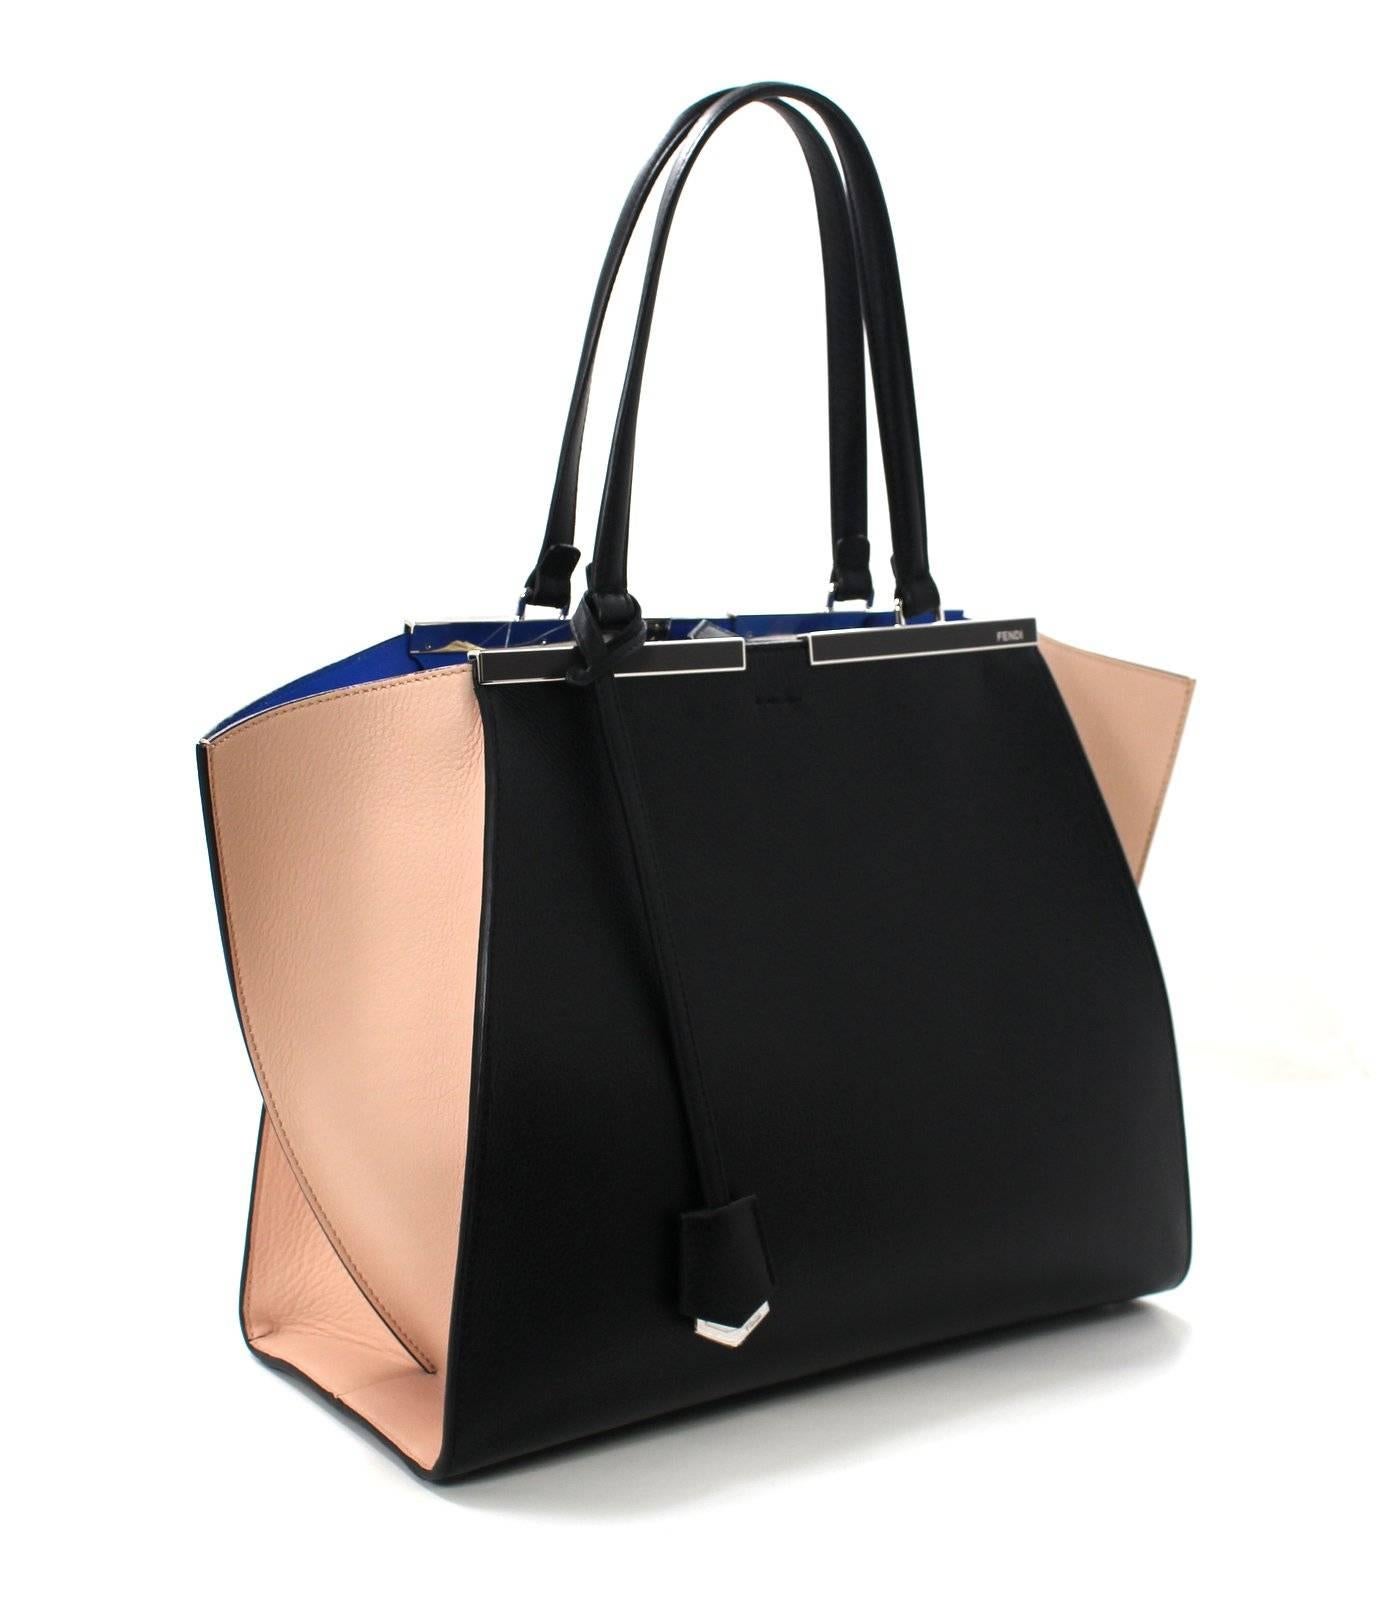 Pristine, Never Carried Fendi Black Tri Color Tote with tag  attached. Retail price $3,050.00.
 Adding color to your wardrobe is easy with Fendi’s clever design.  The striking blue interior  peeks out from within the walls of the black leather